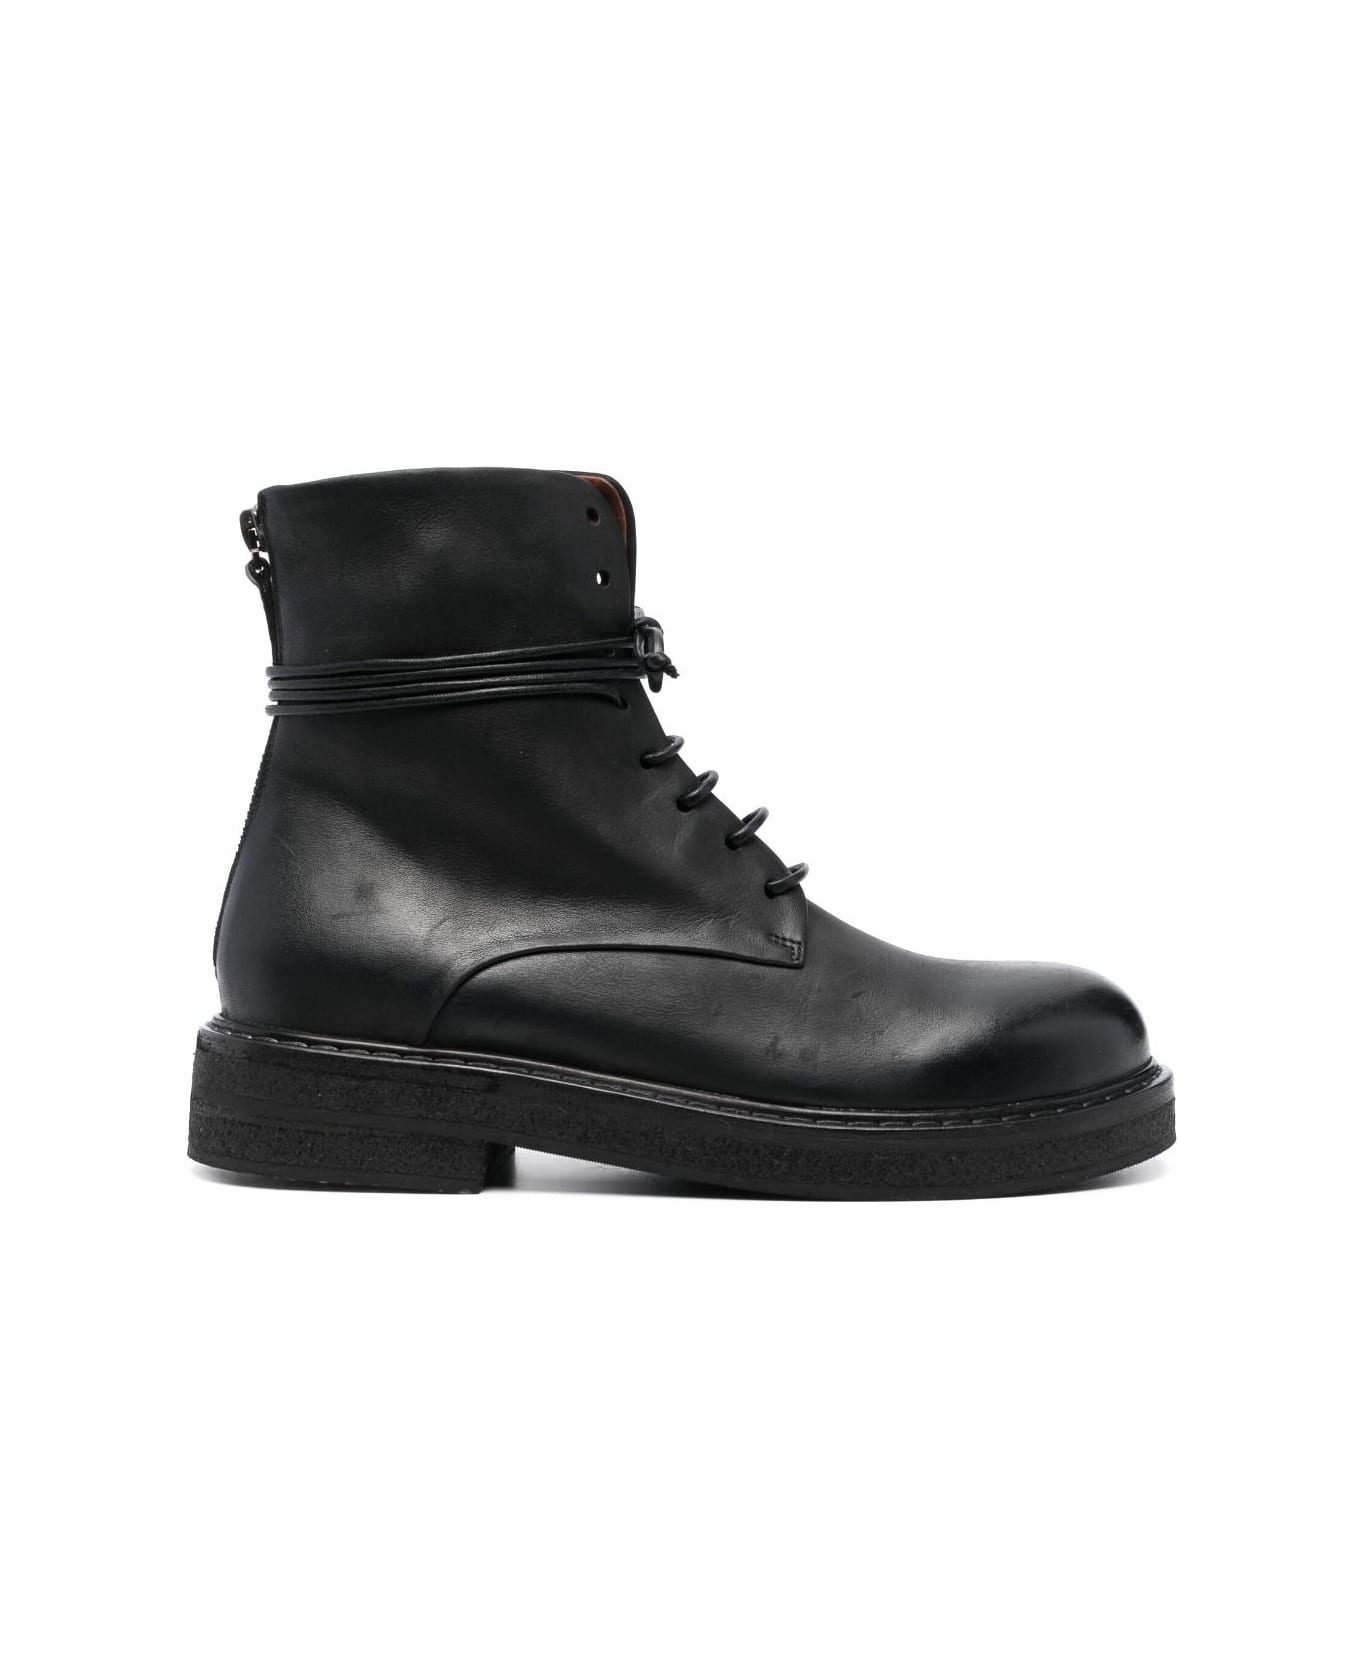 Marsell Parrucca Zipped Ankle Boots - Black